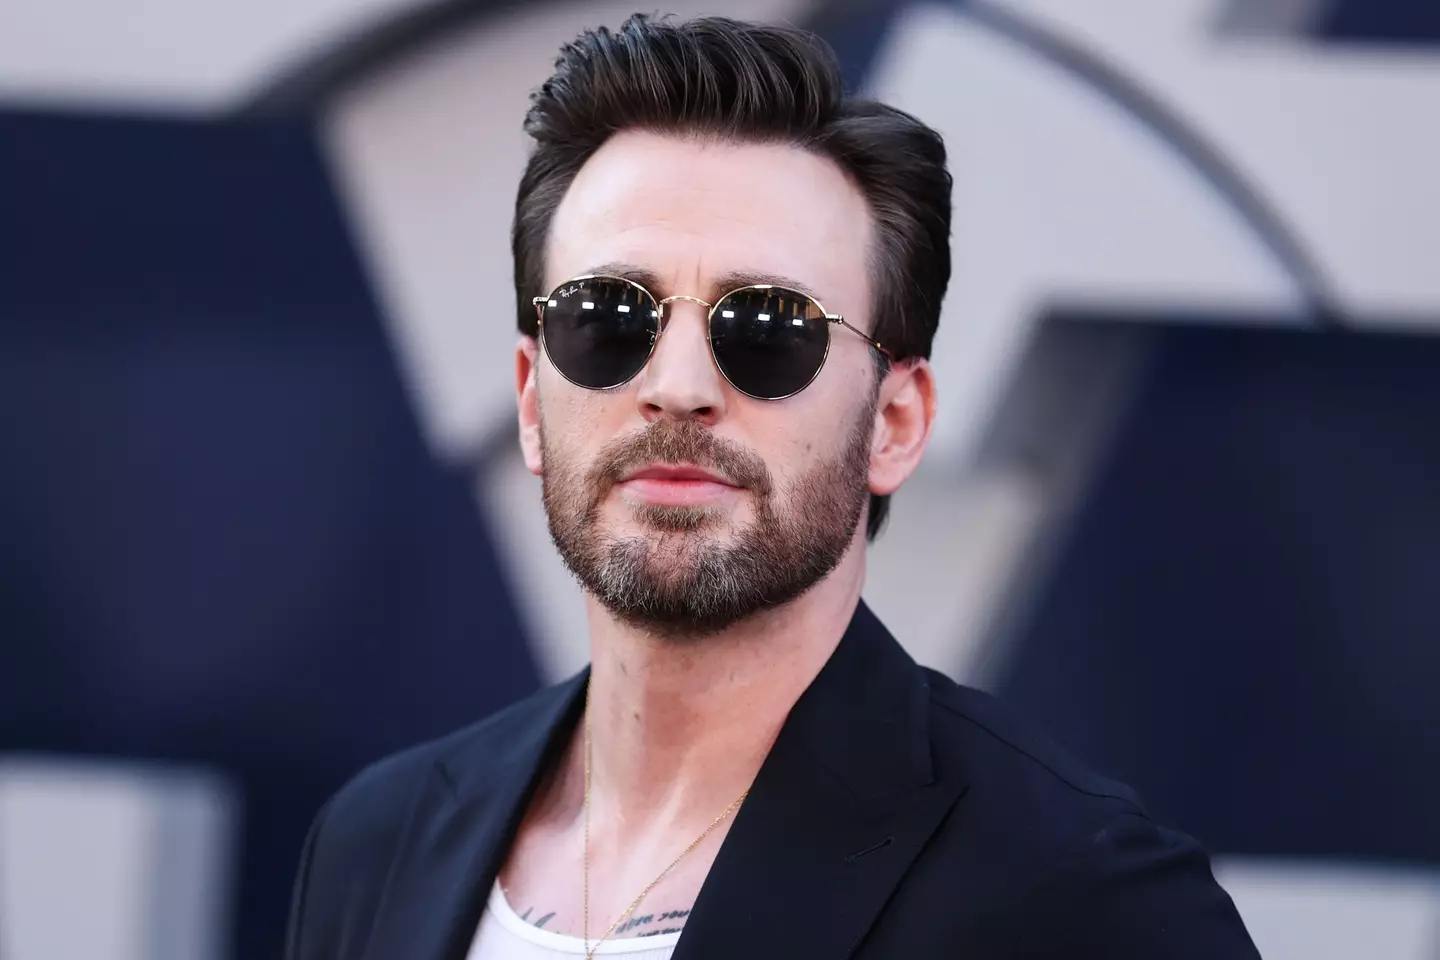 Why not wear shades when you're the sexiest man alive?